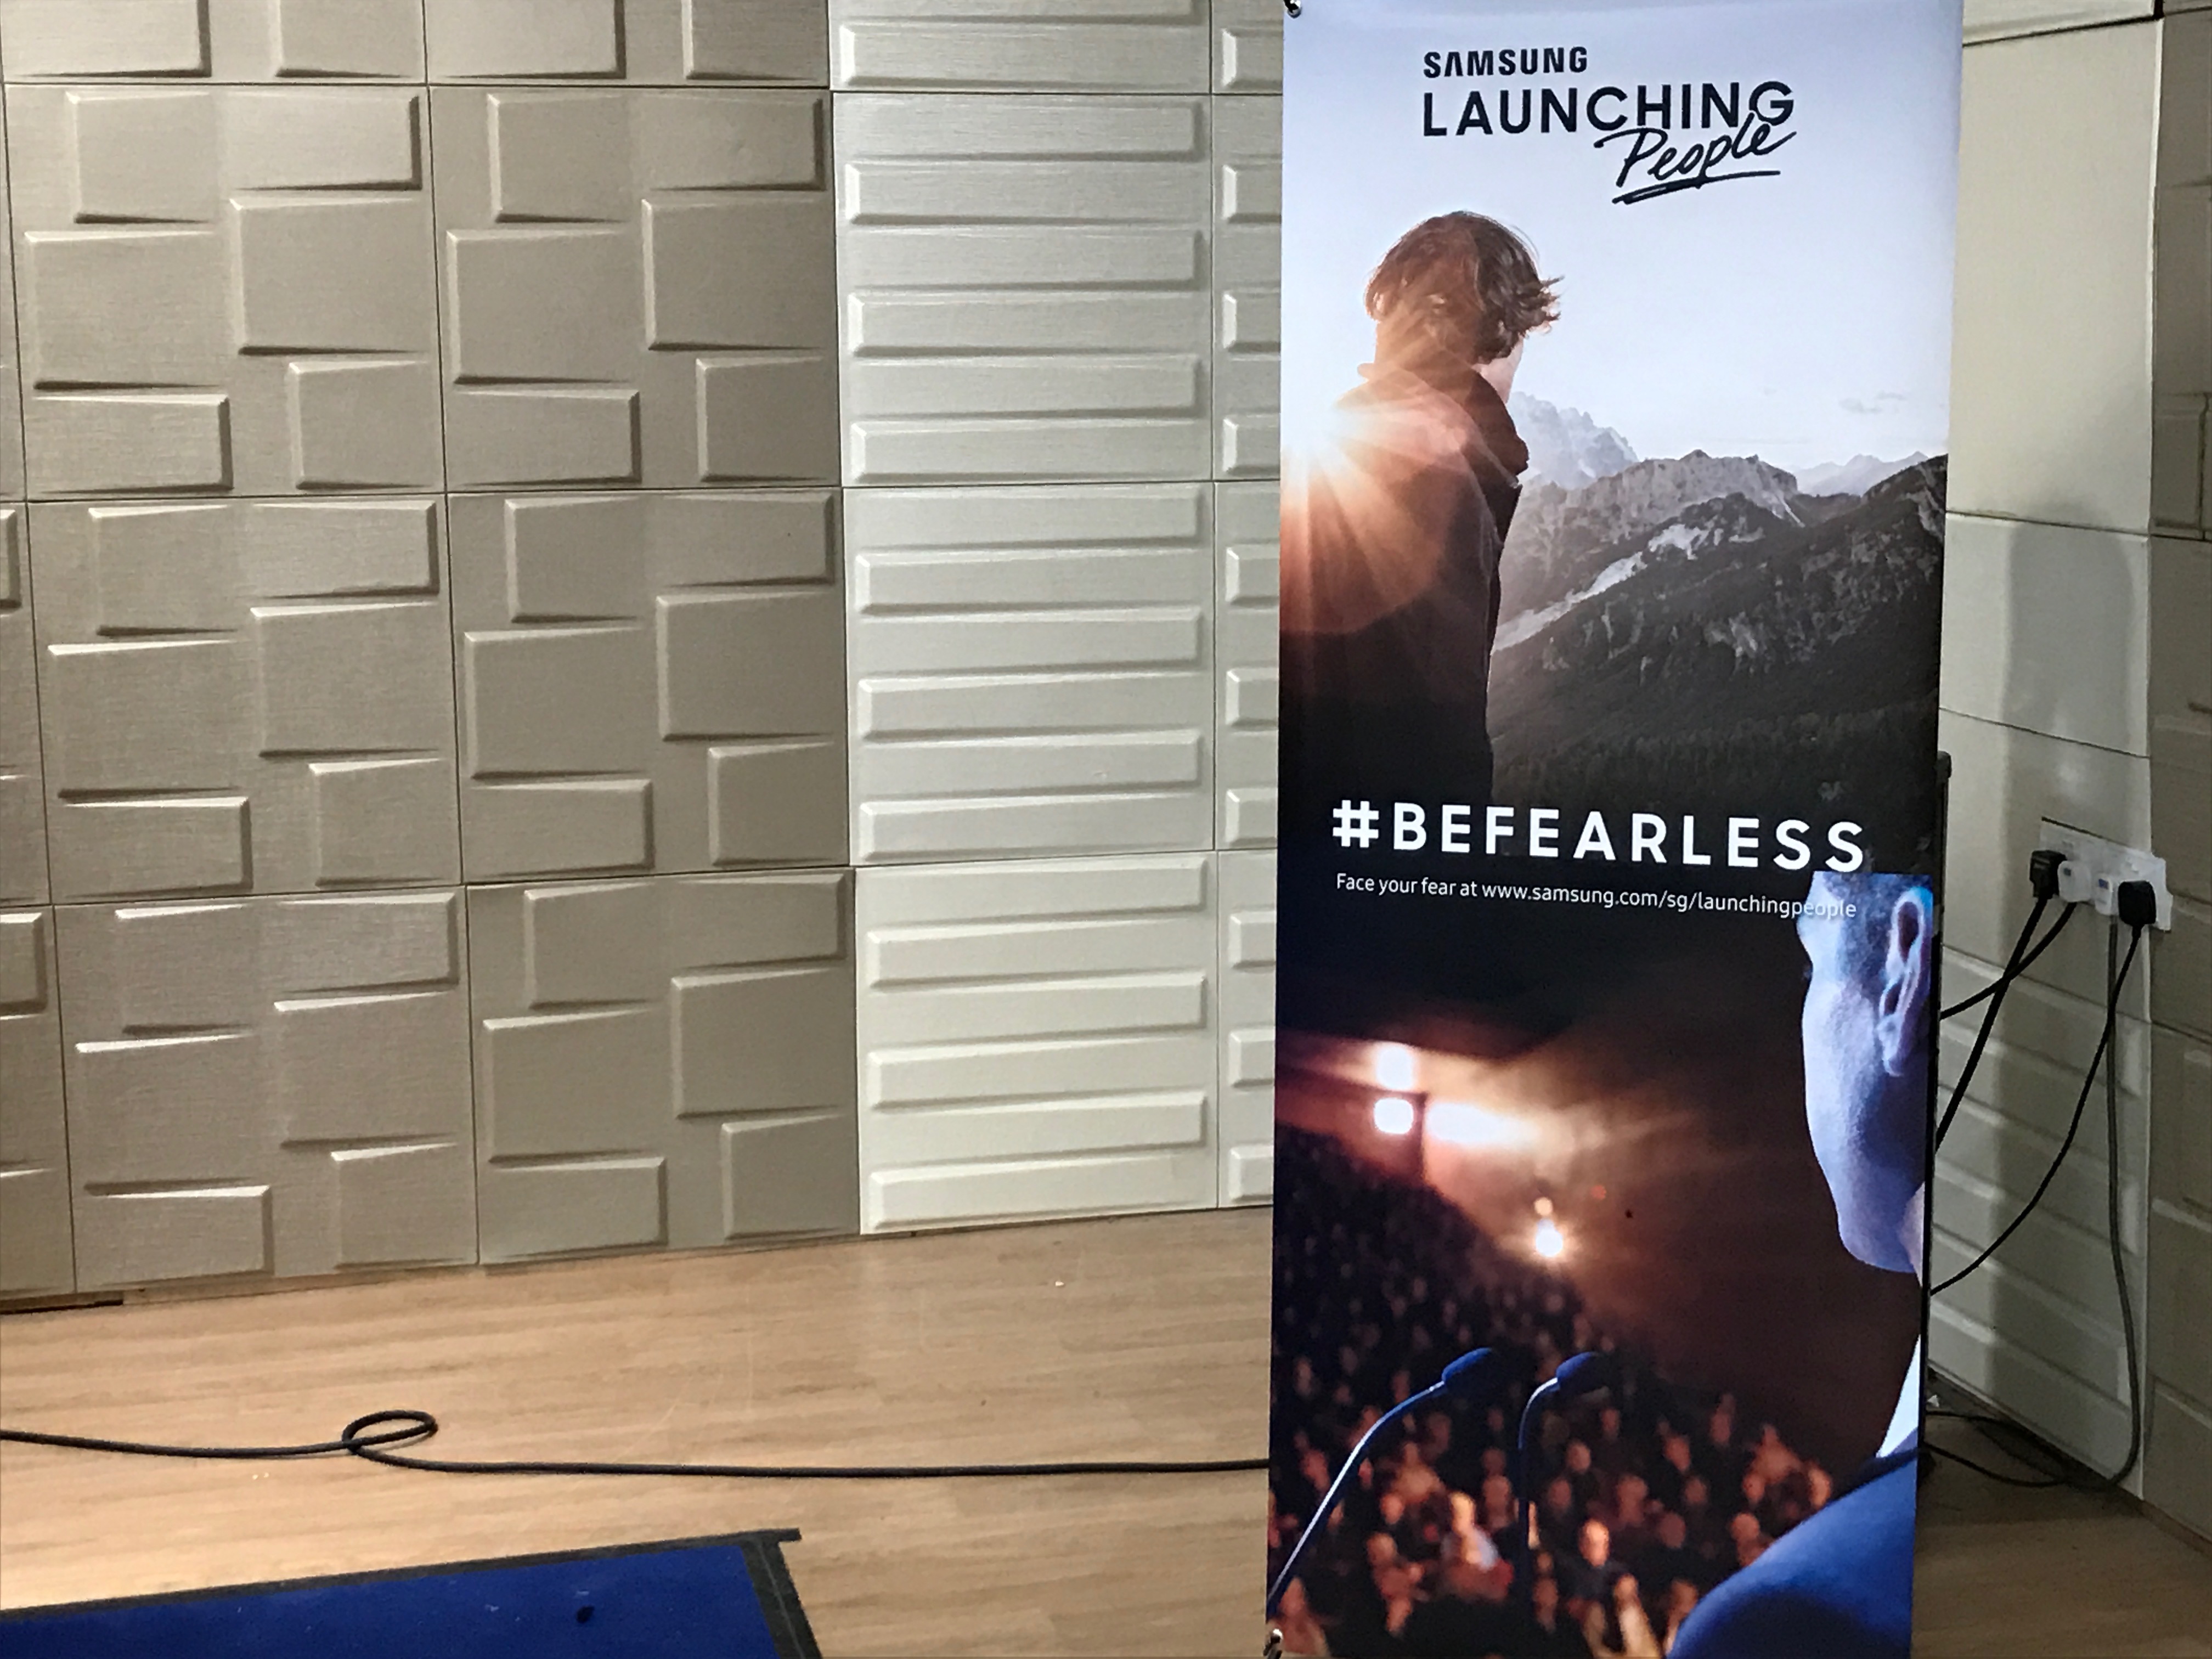 Samsung’s #BeFearless App helps users overcome fear